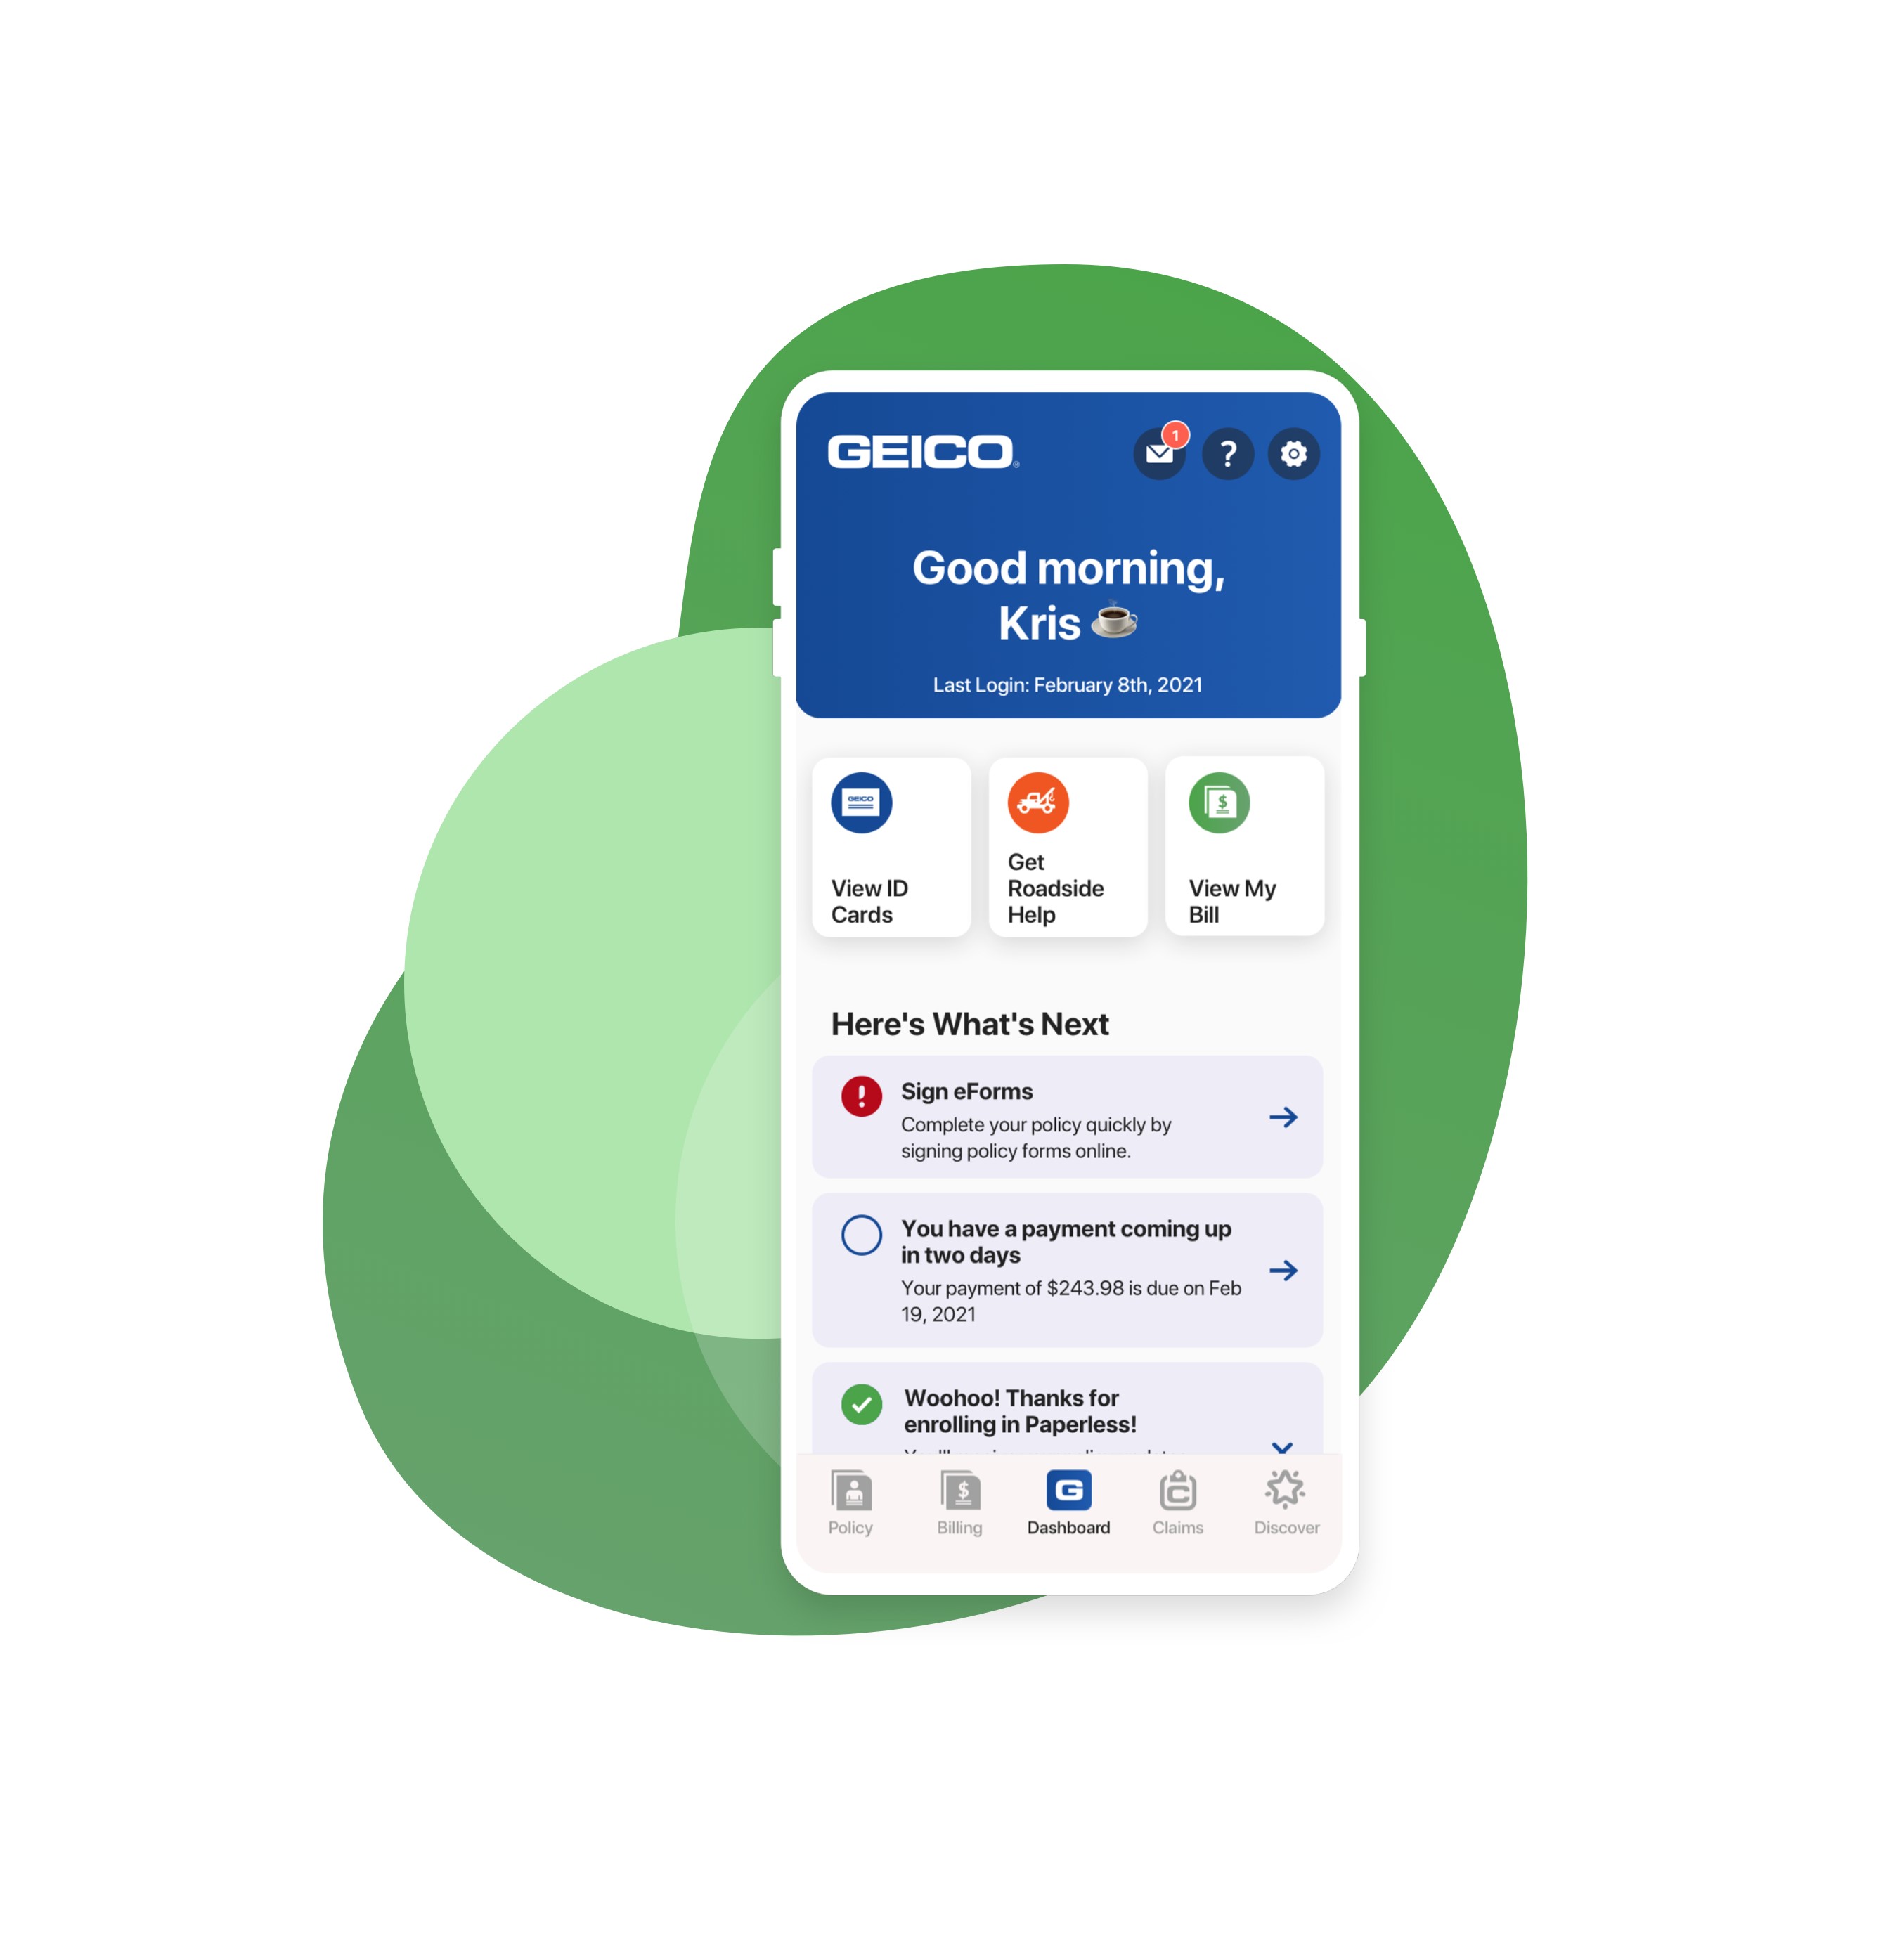 image of GEICO Wins 2021 Best Insurance Mobile Application, Best of Show Mobile Application Mobile WebAward for GEICO Mobile